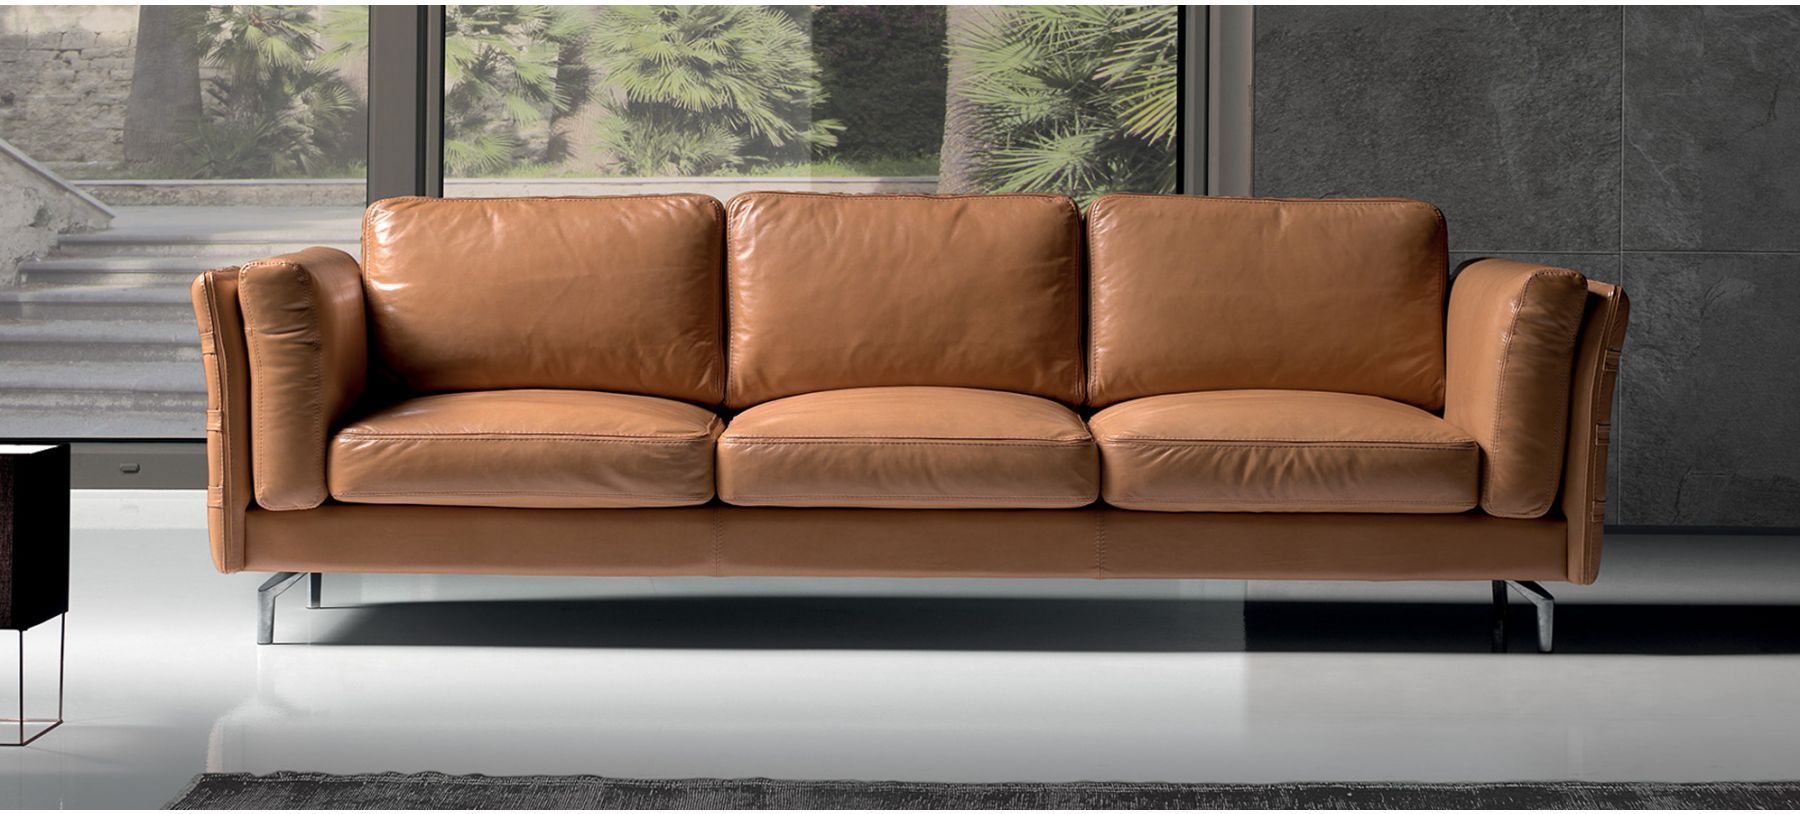 Jenny Leather Tan 3 + 2 Sofa Set With Chrome Legs Newtrend Available In A  Range Of Leathers And Colours 10 Yr Frame 10 Yr Pocket Sprung 5 Yr Foam  Warranty | Leather Sofa World Within Chrome Metal Legs Sofas (Photo 6 of 15)